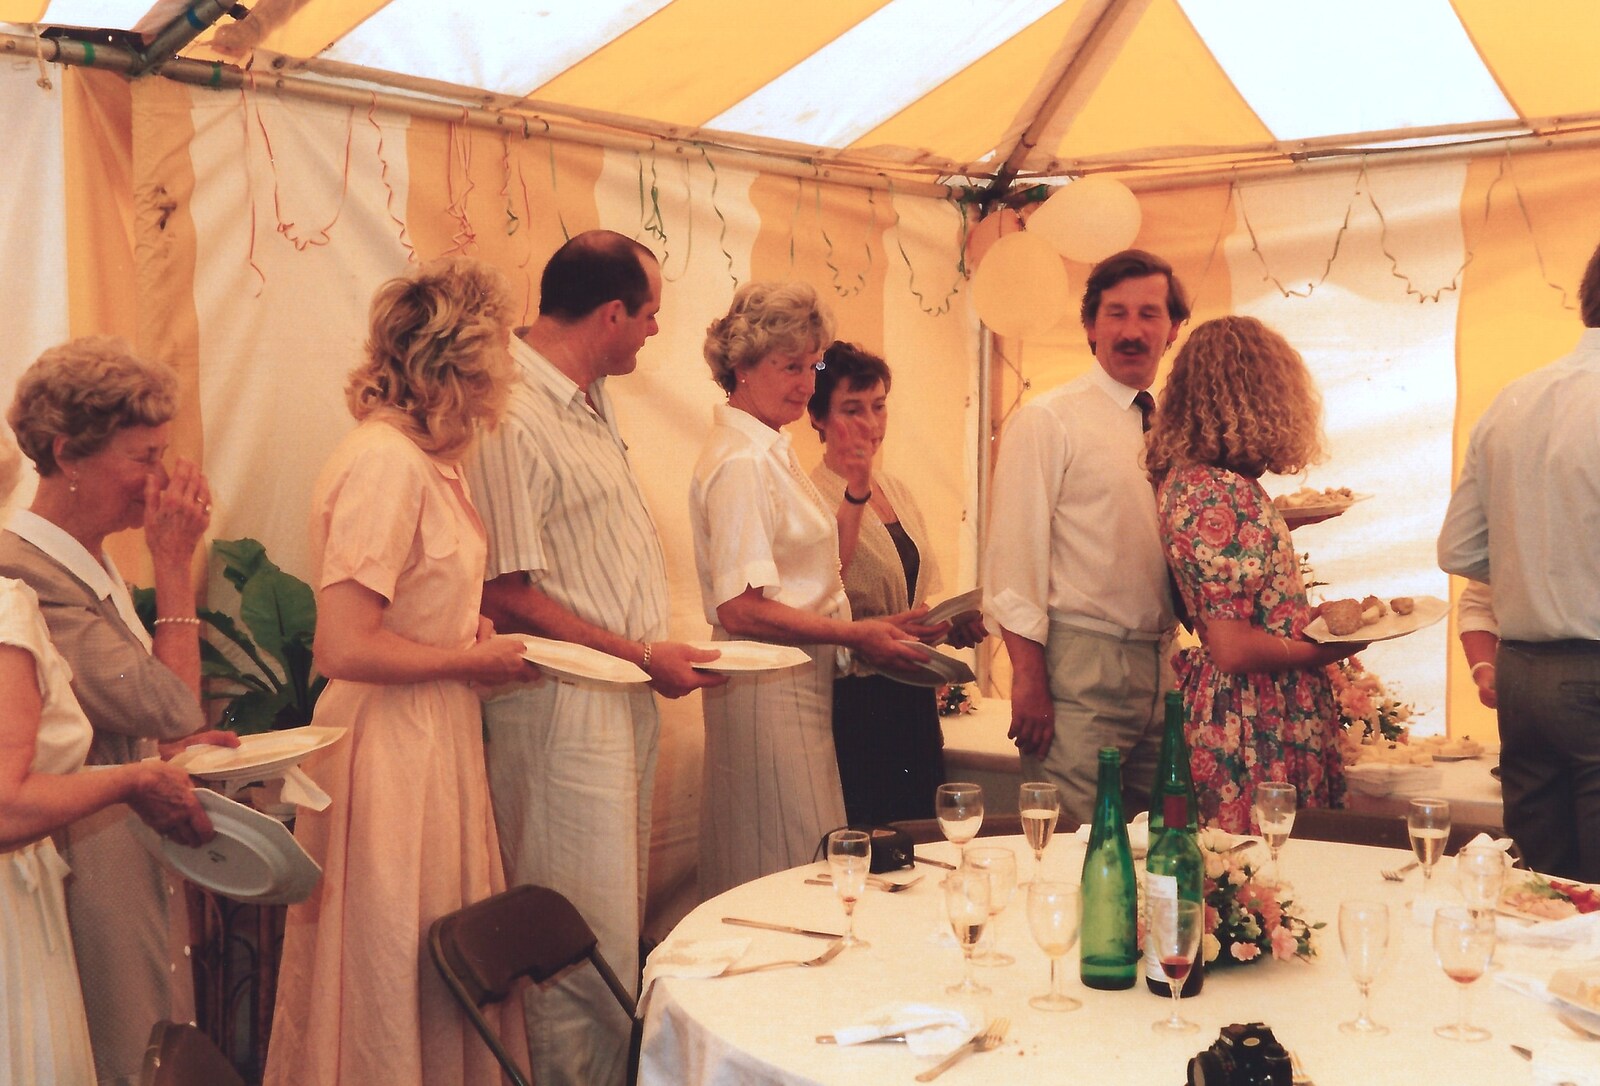 There's a queue for food from Mother and Mike's Wedding Reception, Bransgore, Dorset - 20th August 1988